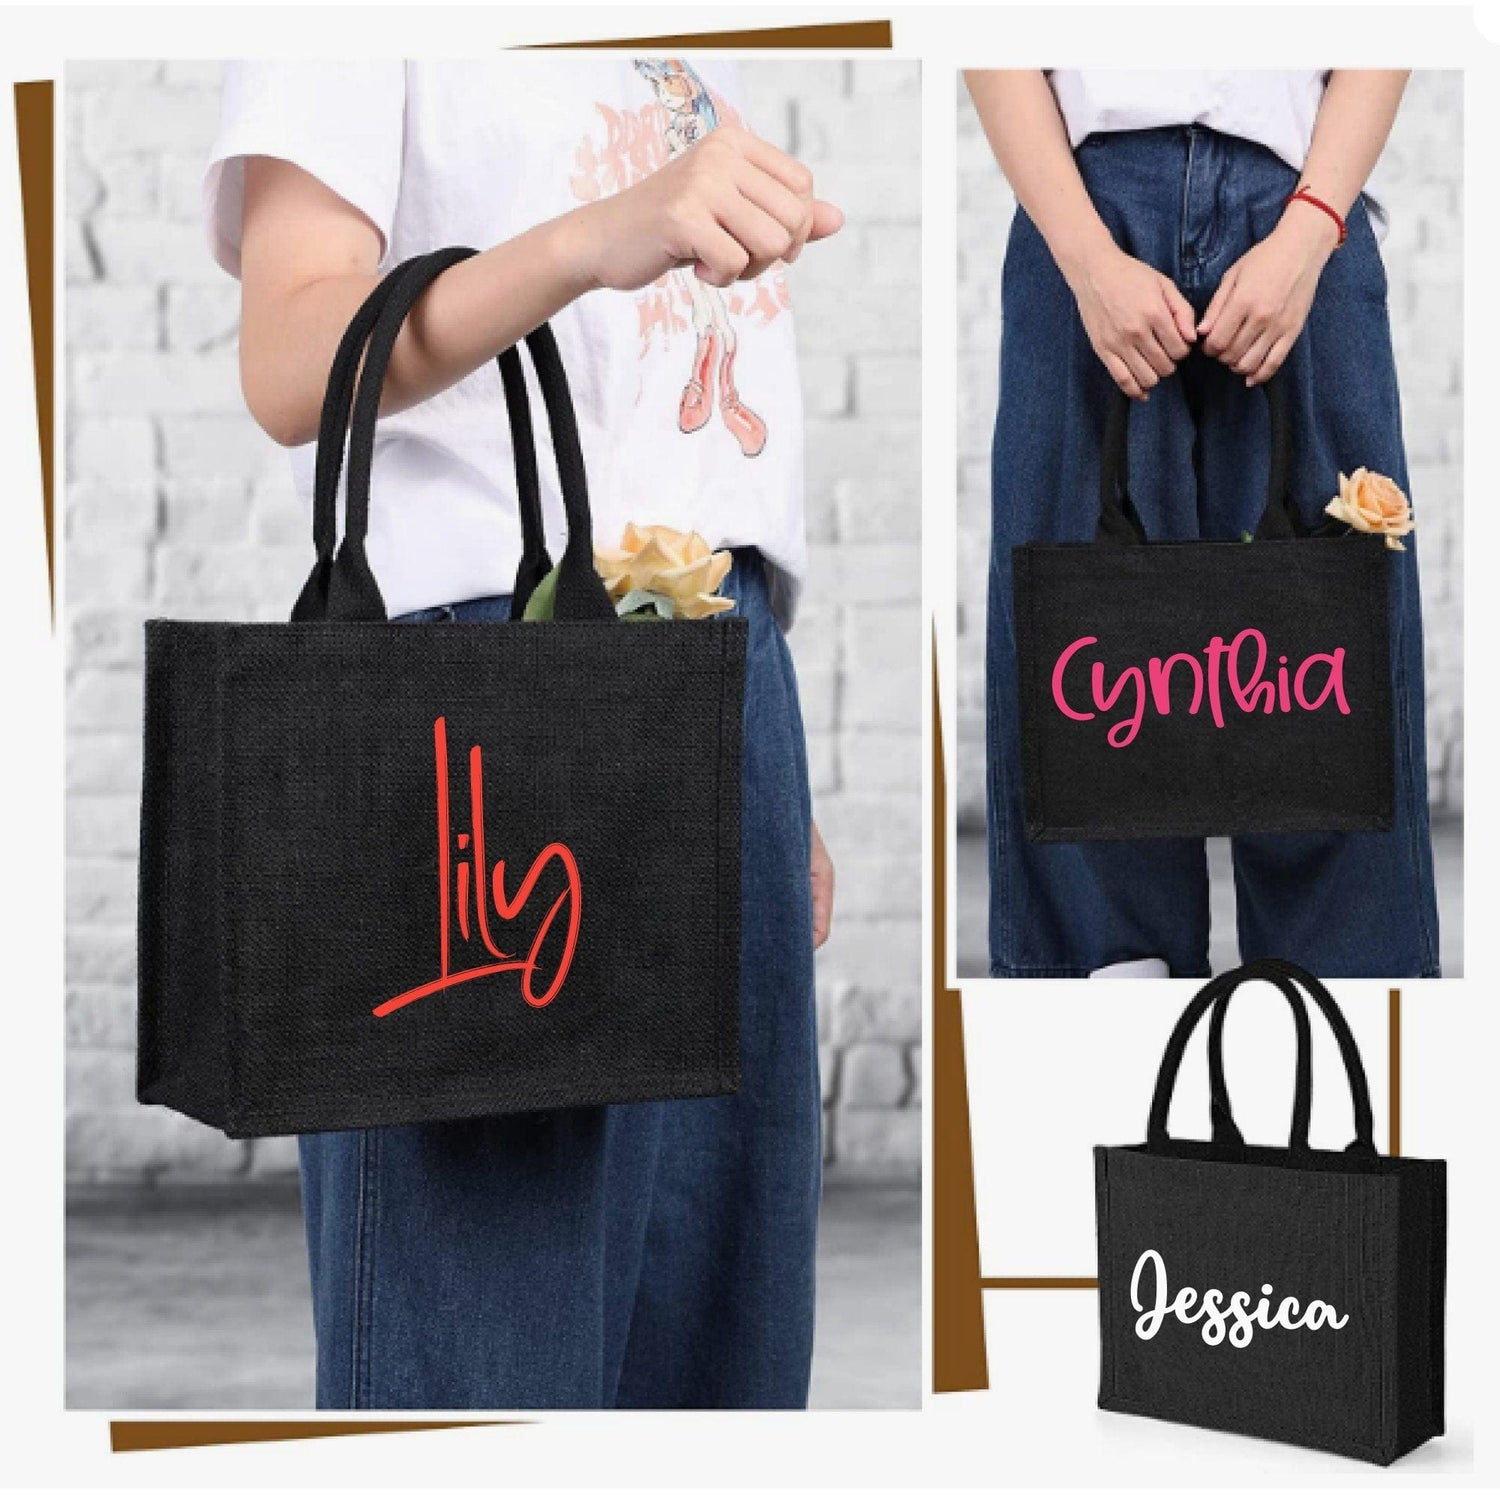 What Is a Monogram Tote Bag? | Barrington Gifts - Blog